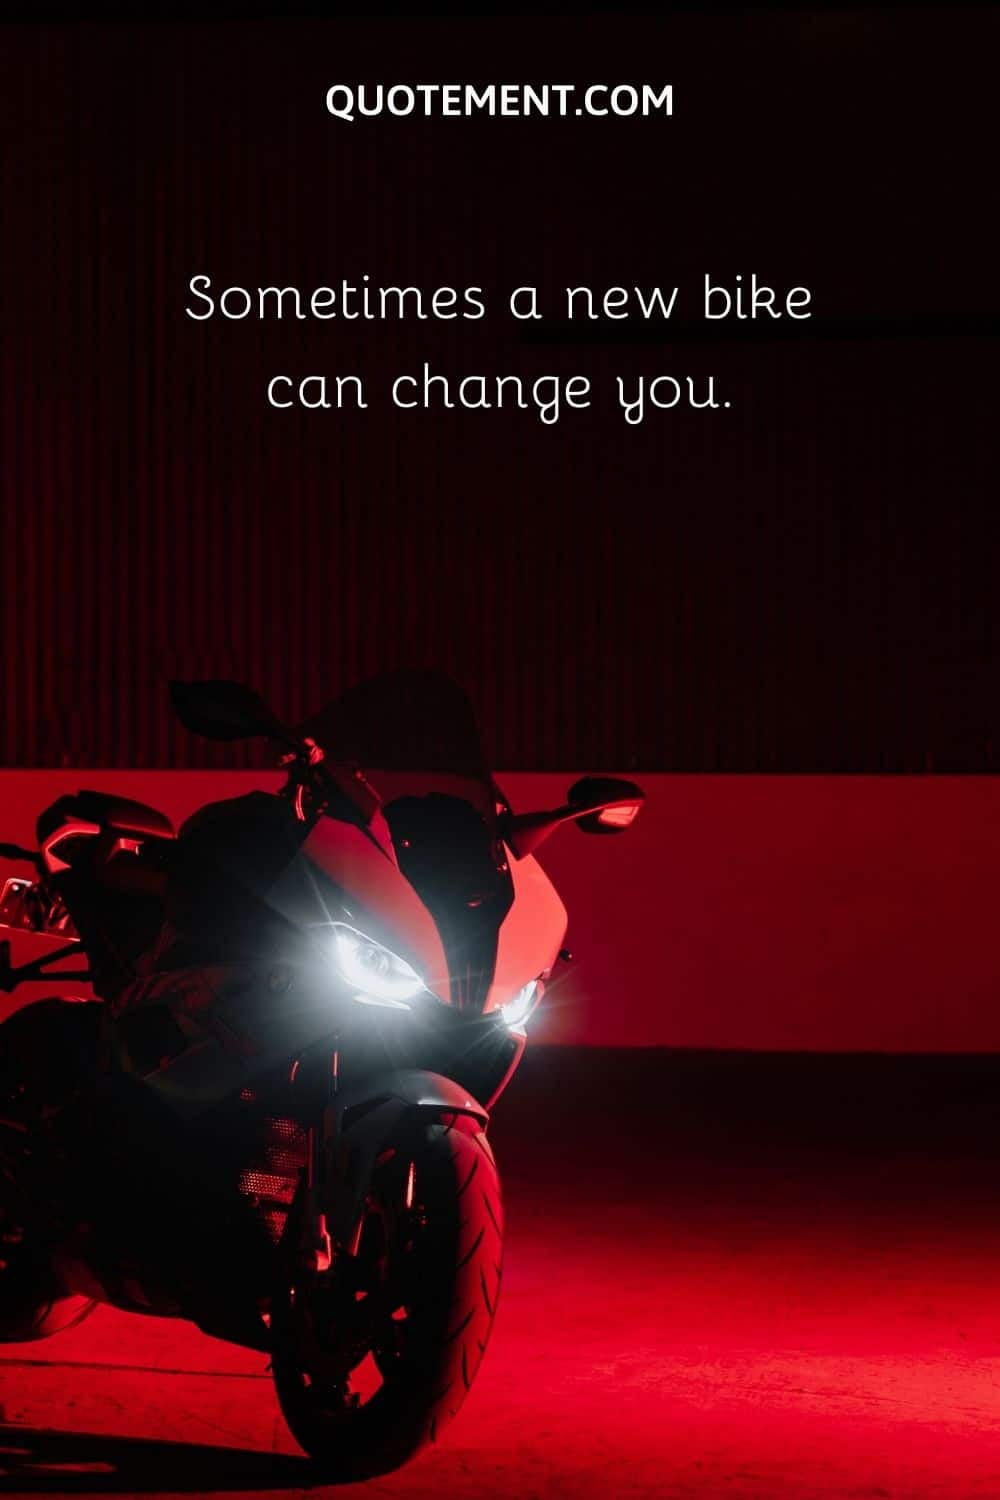 Sometimes a new bike can change you.